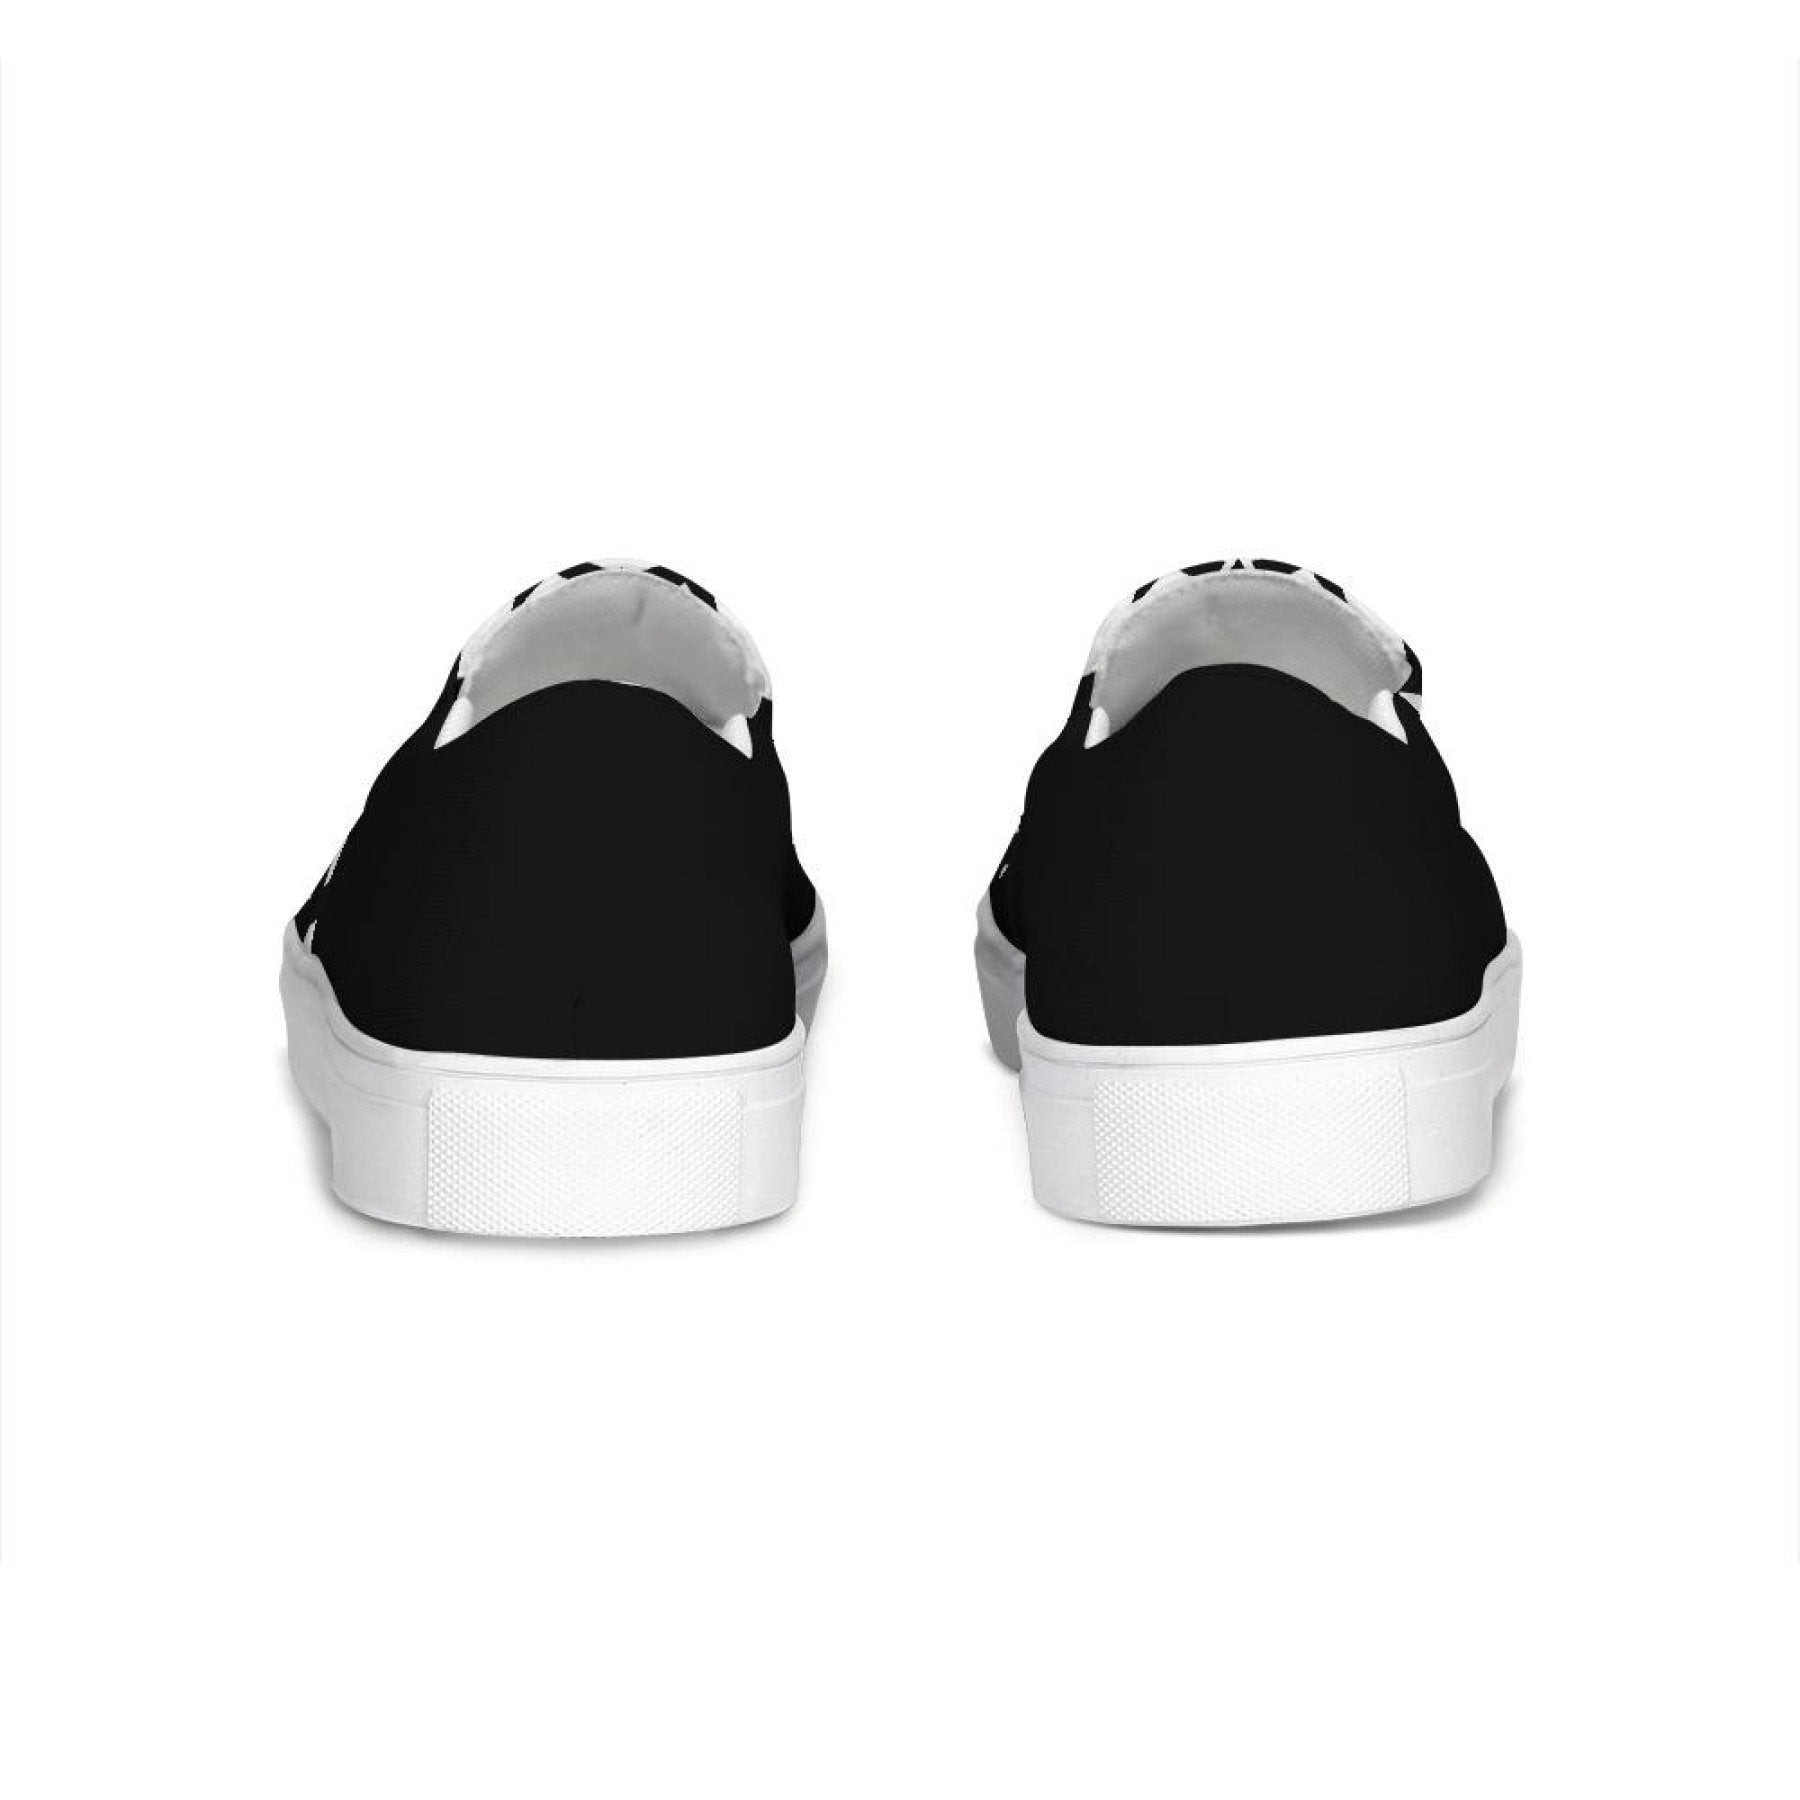 Black & White Canvas Slip On Shoes Grey Coco